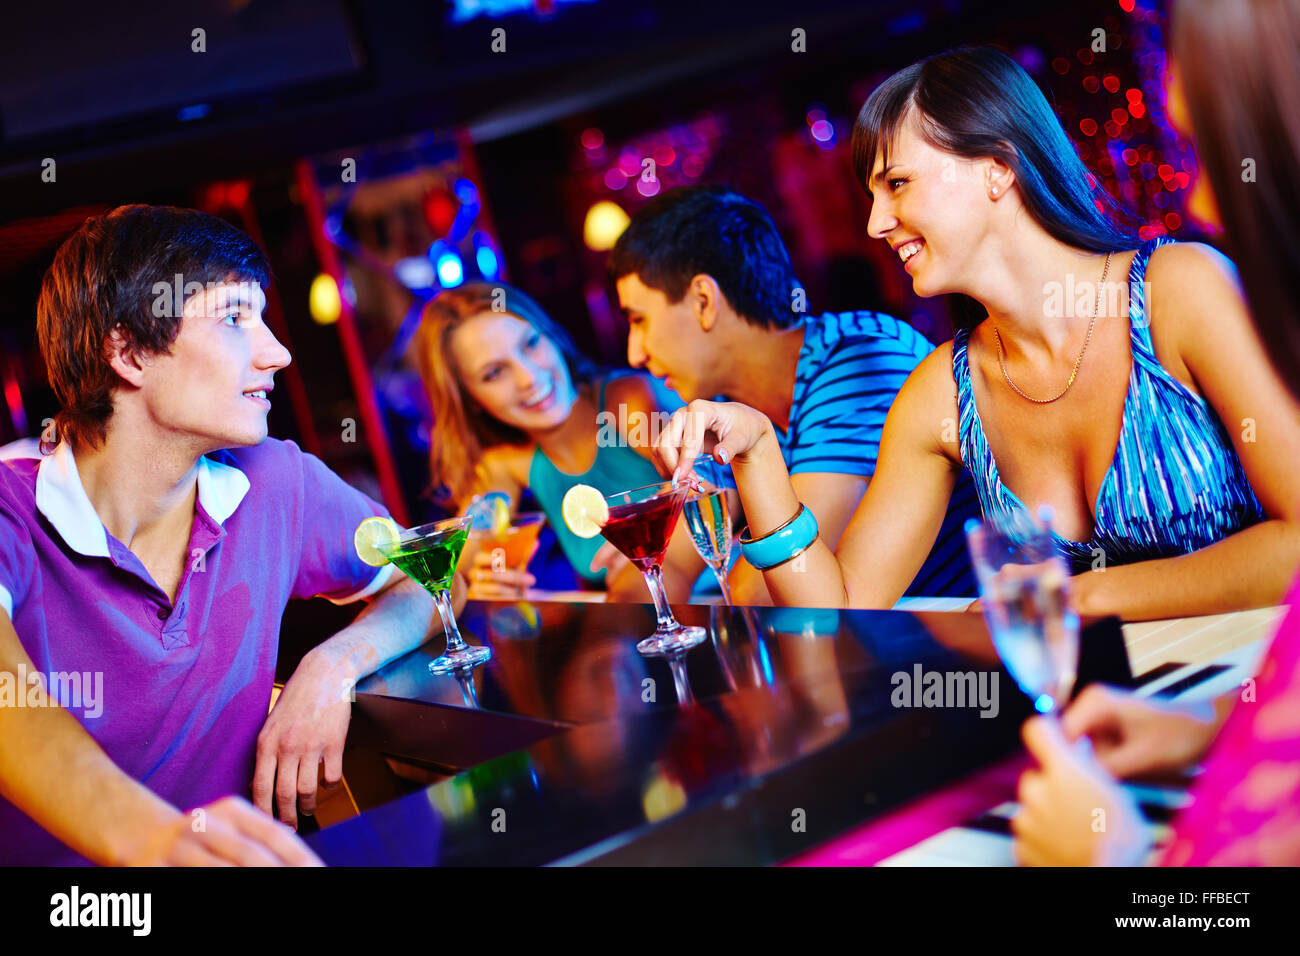 Young man and woman talking at nightclub Banque D'Images